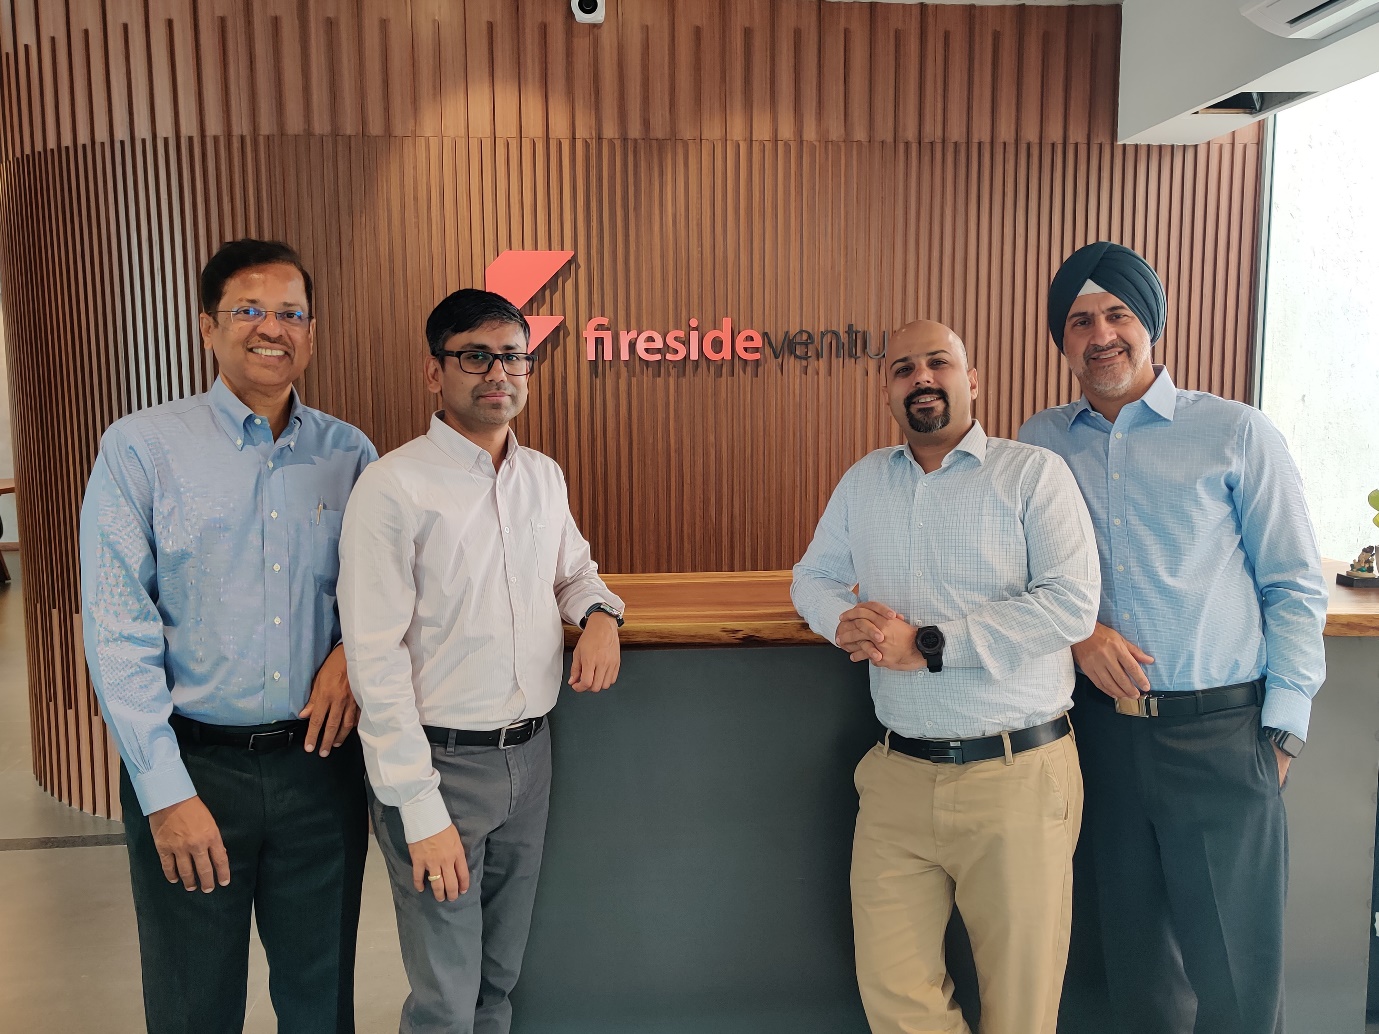 India’s high-income households fuel new, unique brands: Q&A with VS Kannan Sitaram, Fireside Ventures